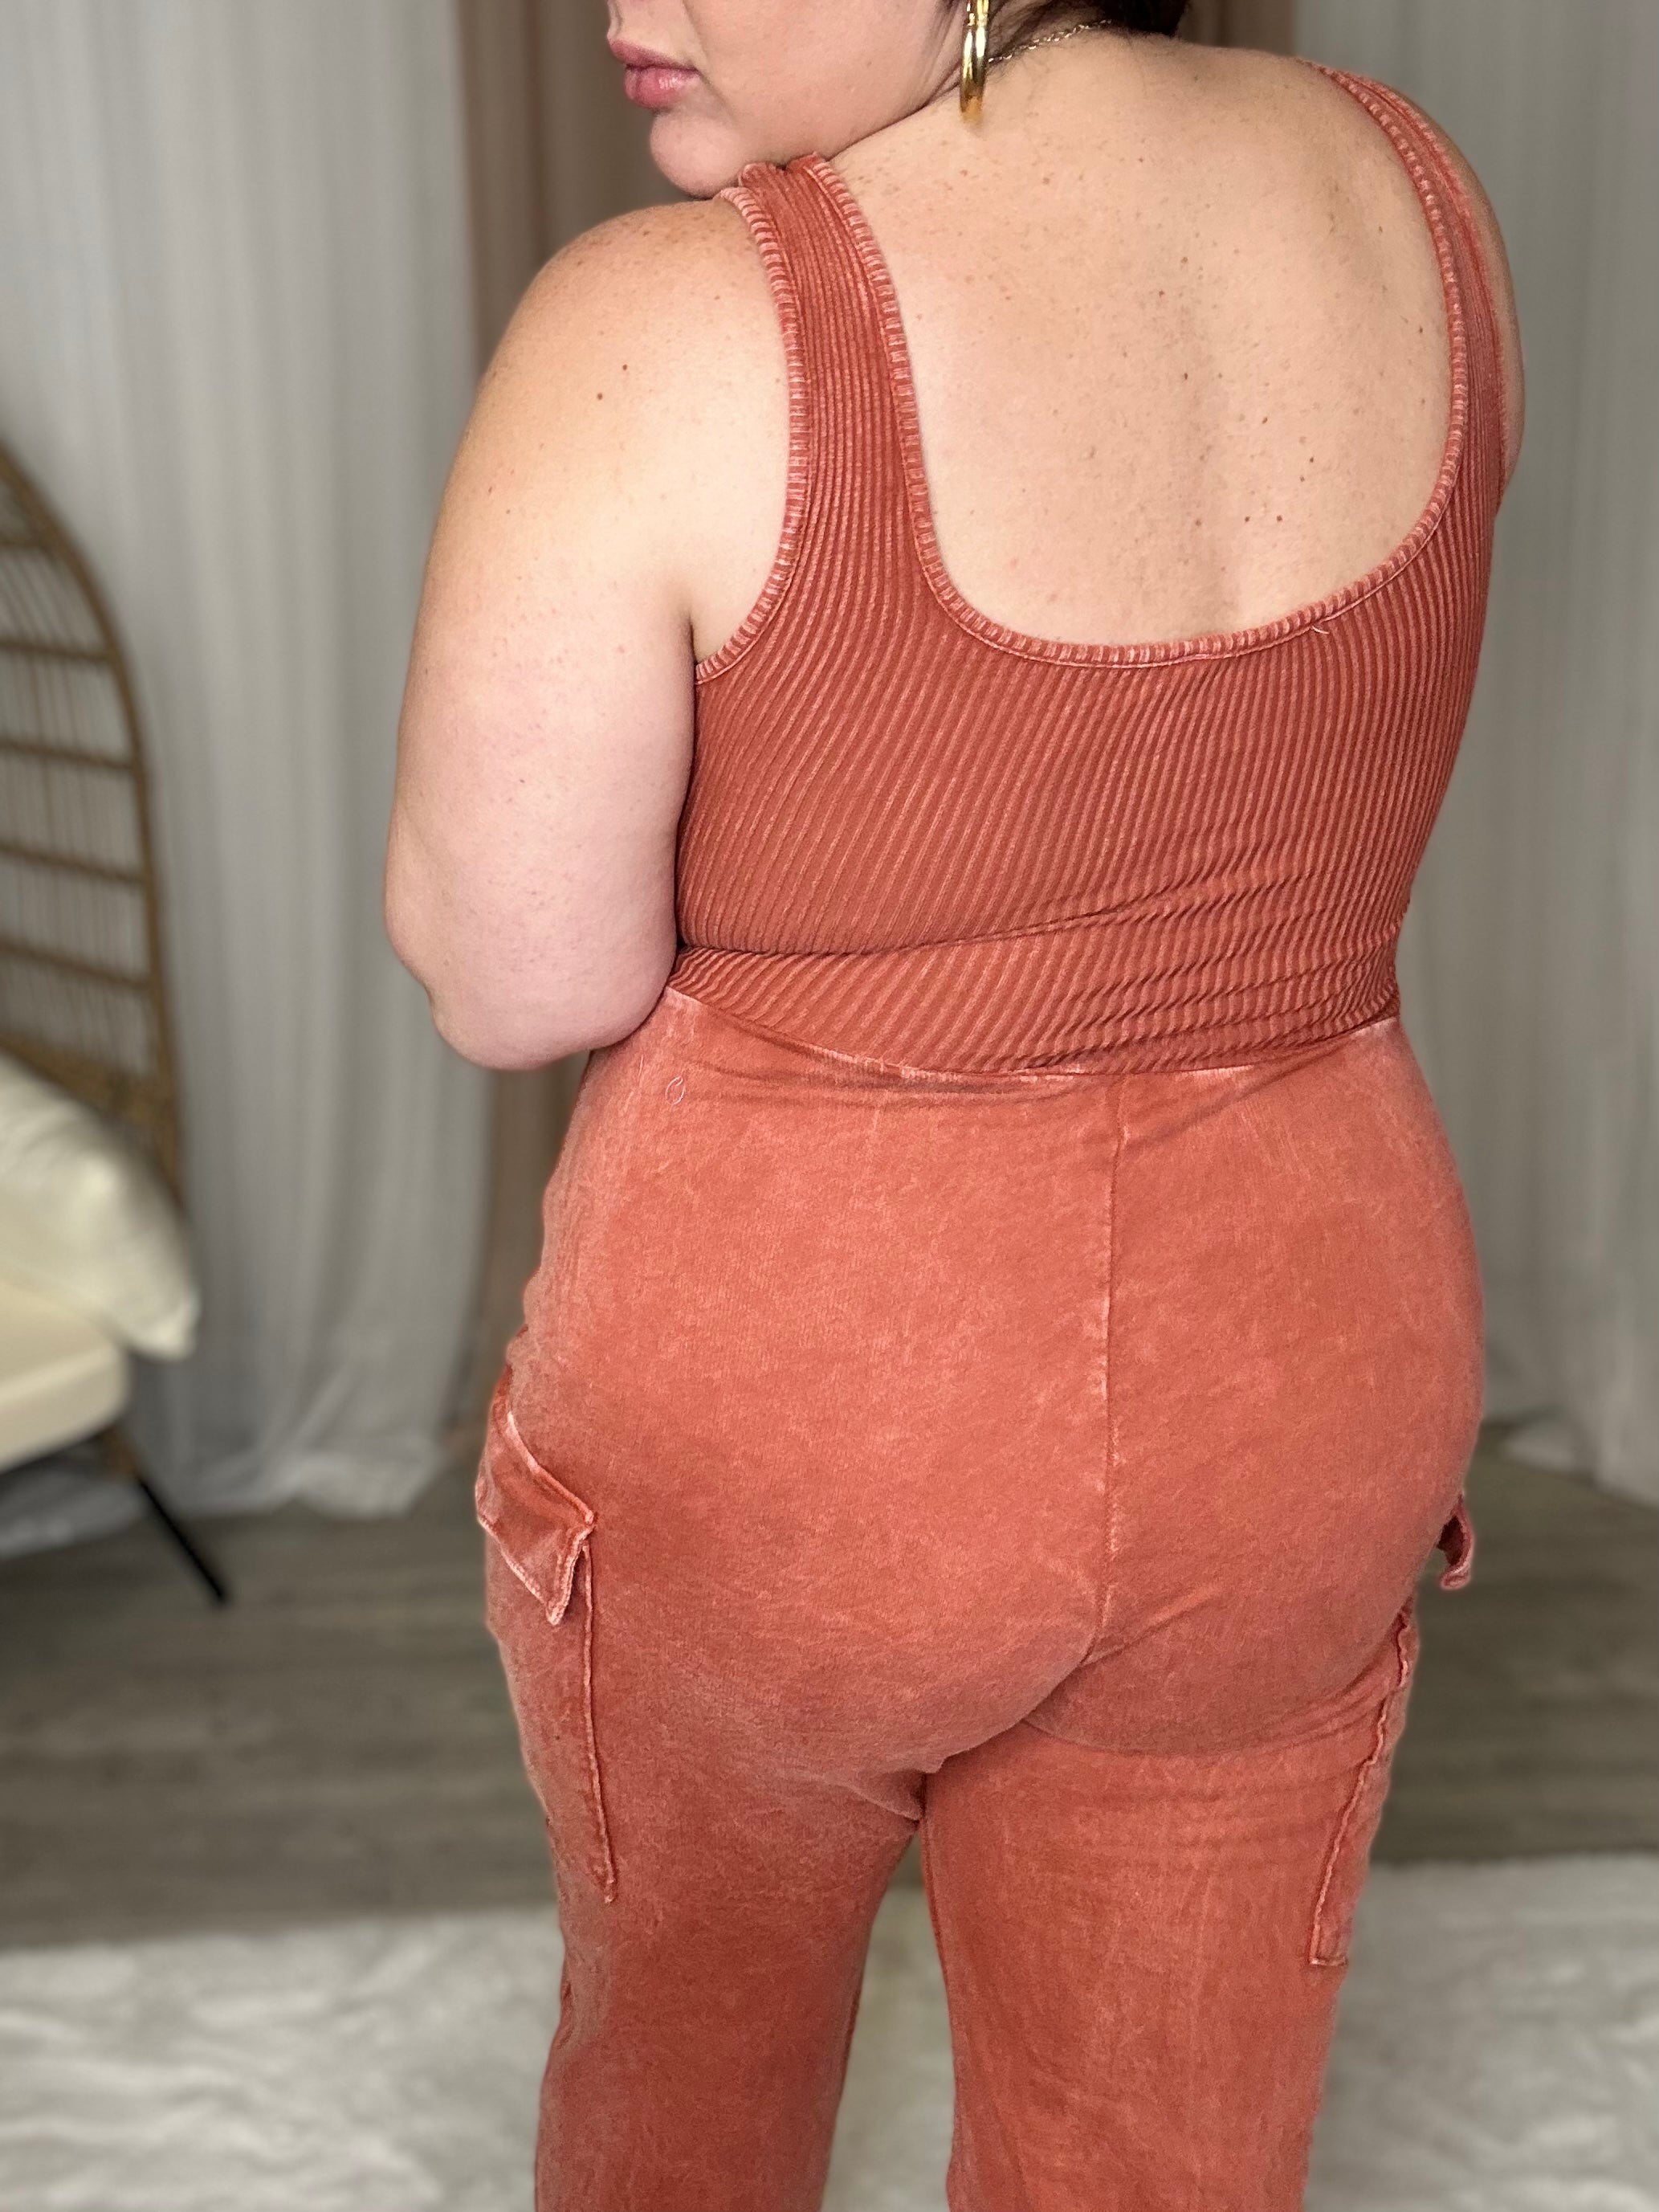 Super Waist Snatcher Mineral Wash Jumpsuit-230 Dresses/Jumpsuits/Rompers-J. Her-Heathered Boho Boutique, Women's Fashion and Accessories in Palmetto, FL